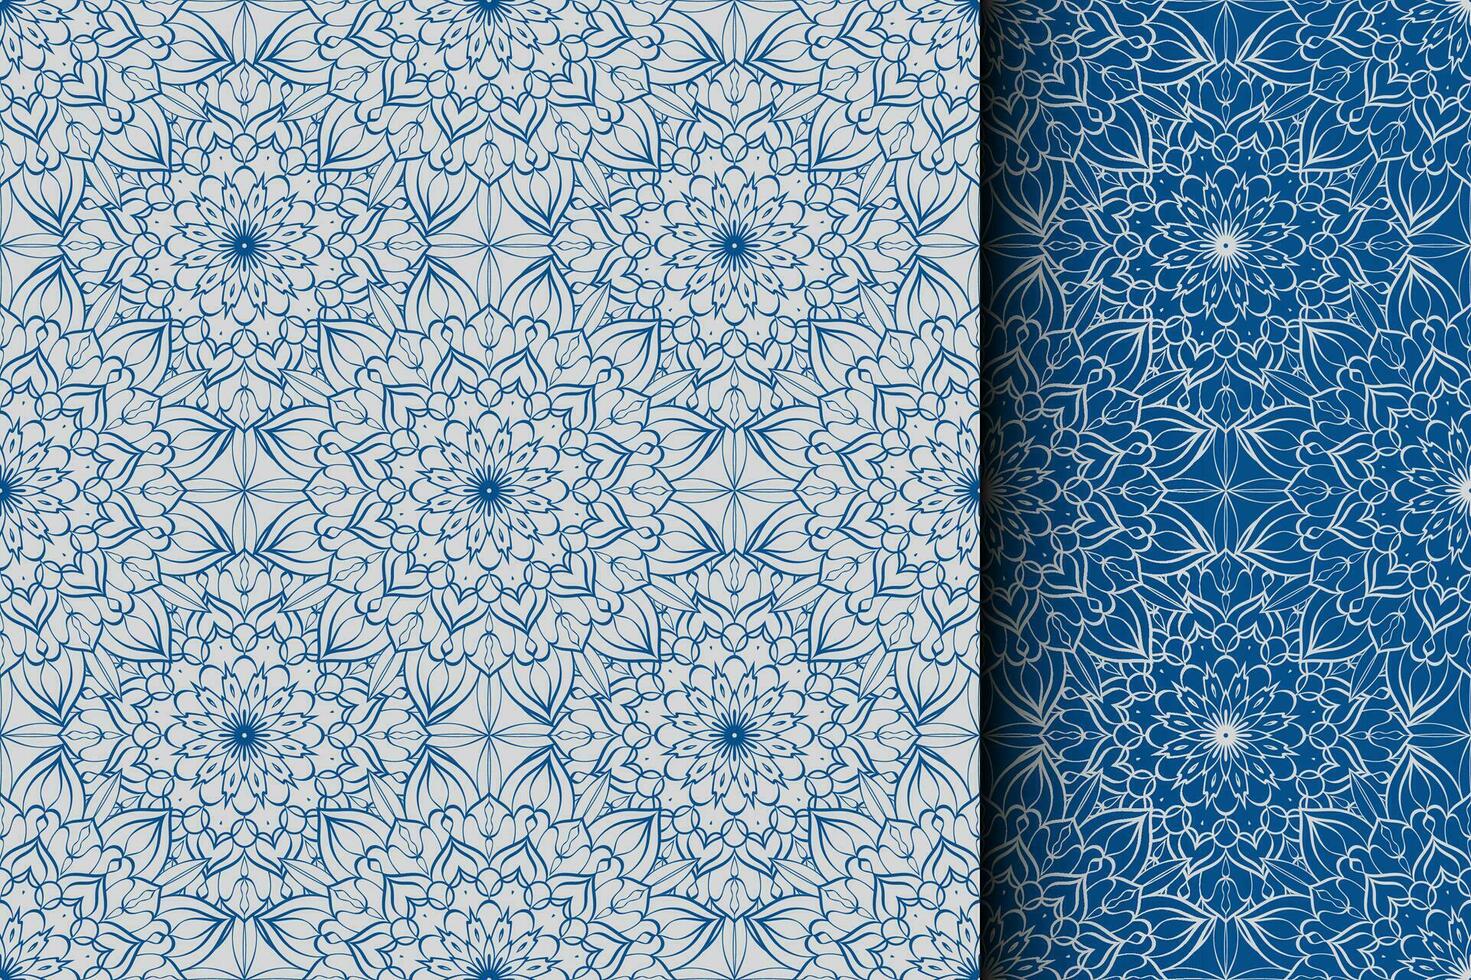 Seamless mandala pattern. Blue geometric abstract endless background. Islam, Arabic, Indian, ottoman motifs for printing on fabric or paper. vector